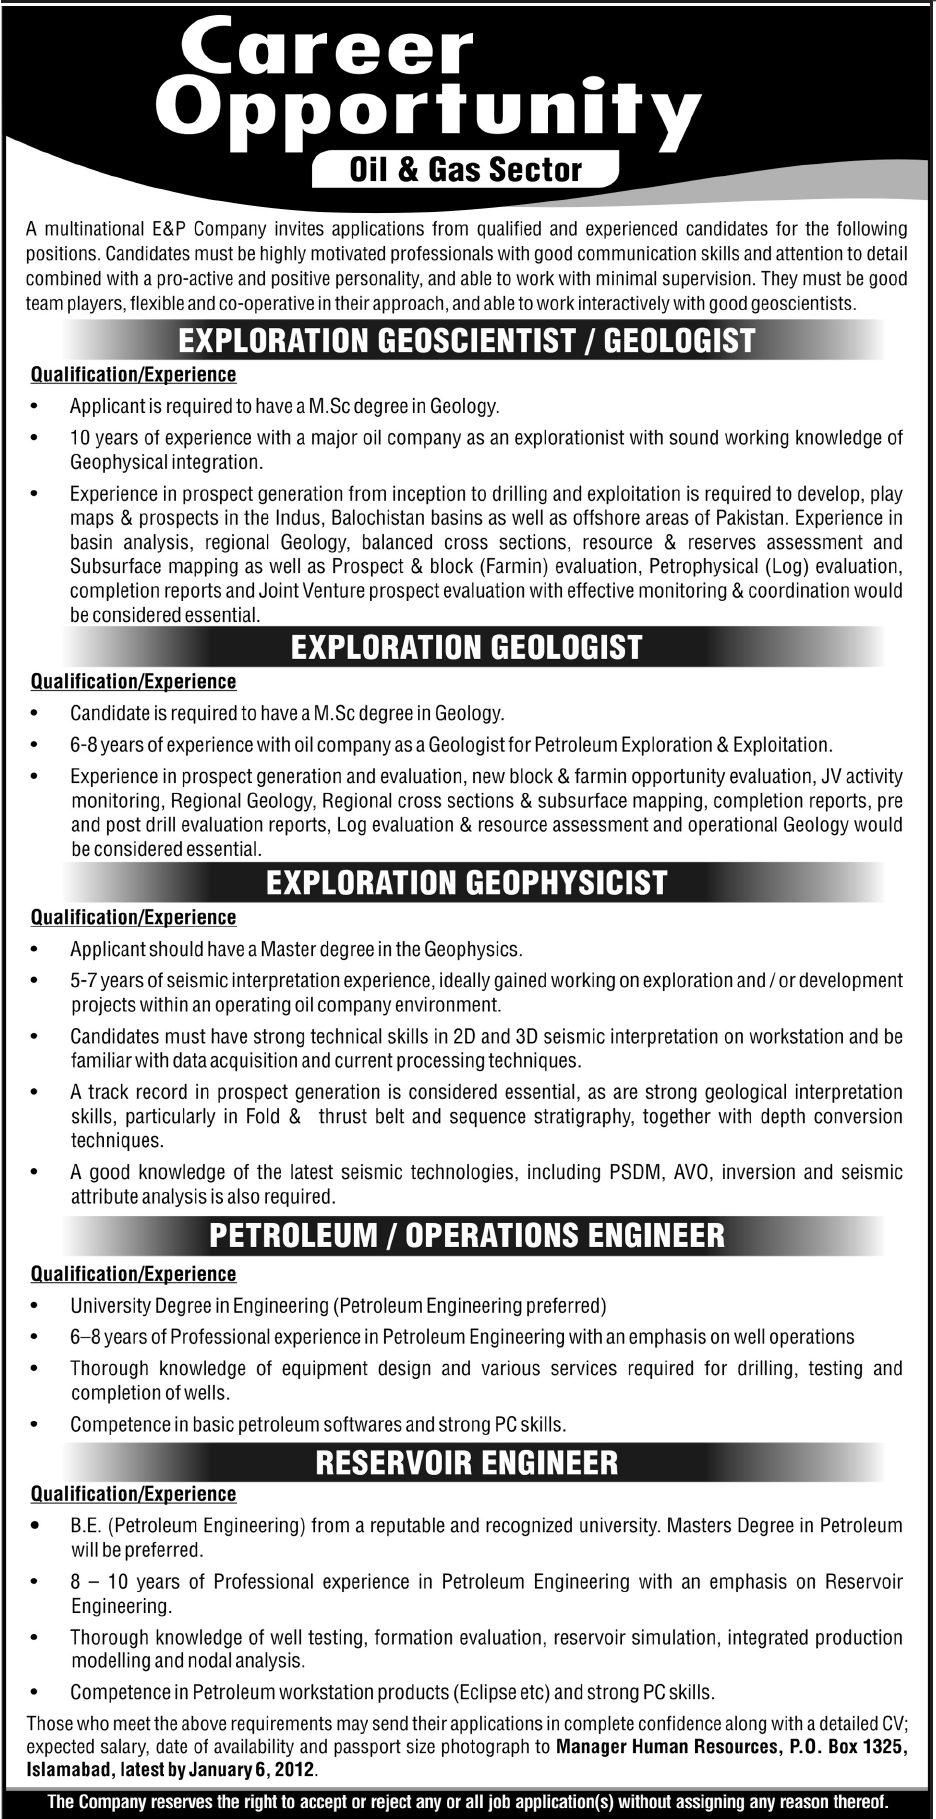 Oil and Gas Sector Company Jobs Opportunities